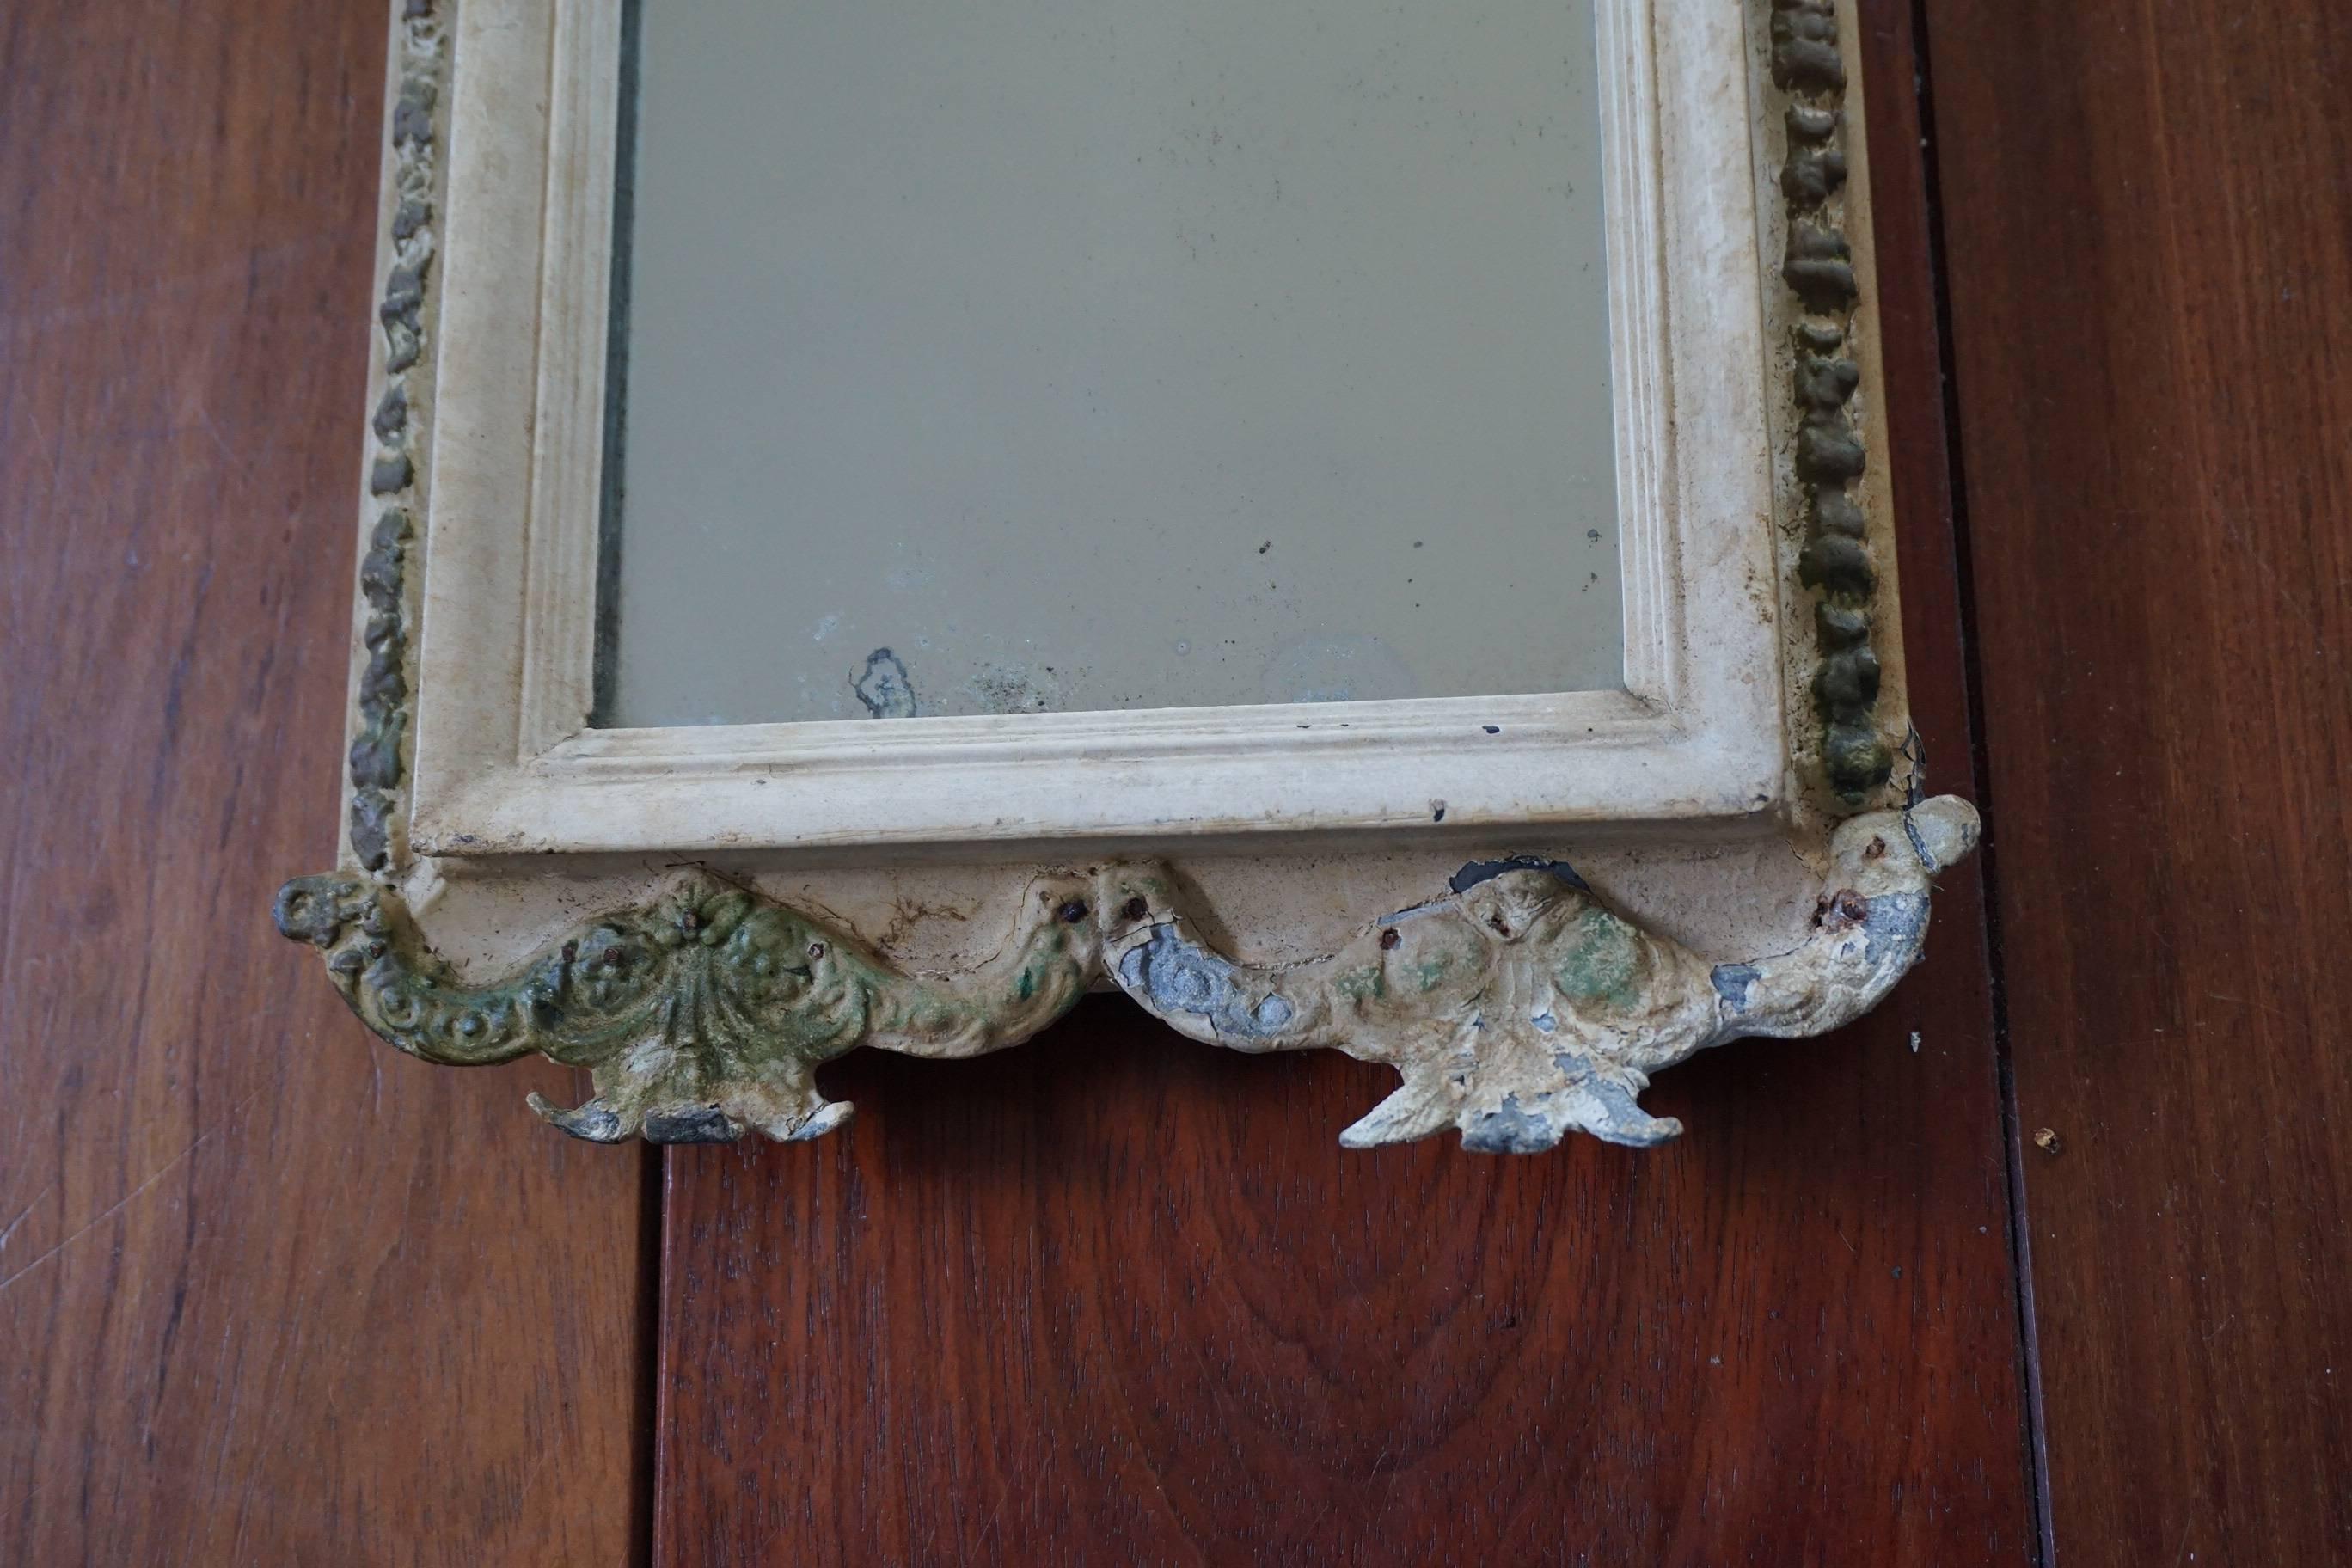 Cast Antique Louis Seize Style Wall Mirror So Called 'Damspiegel' of Wood and Metal For Sale